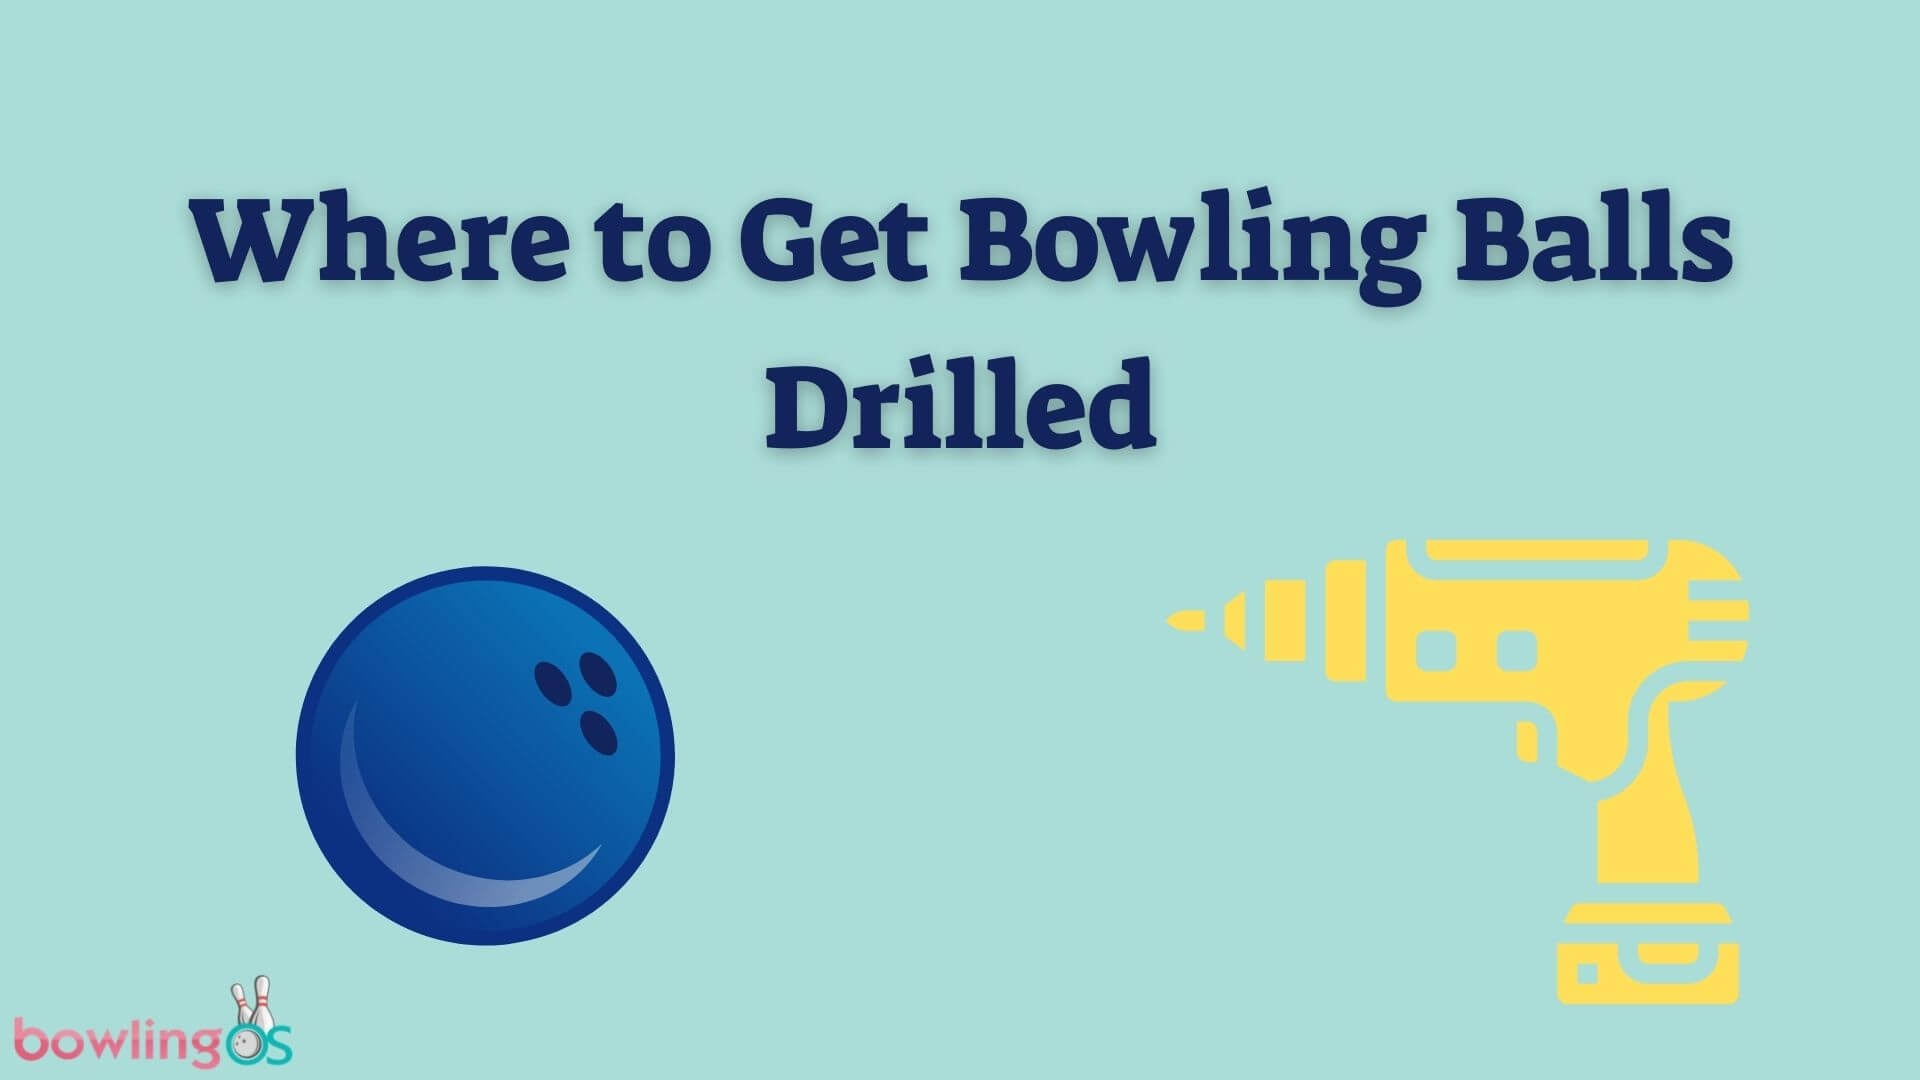 Where to Get Bowling Balls Drilled